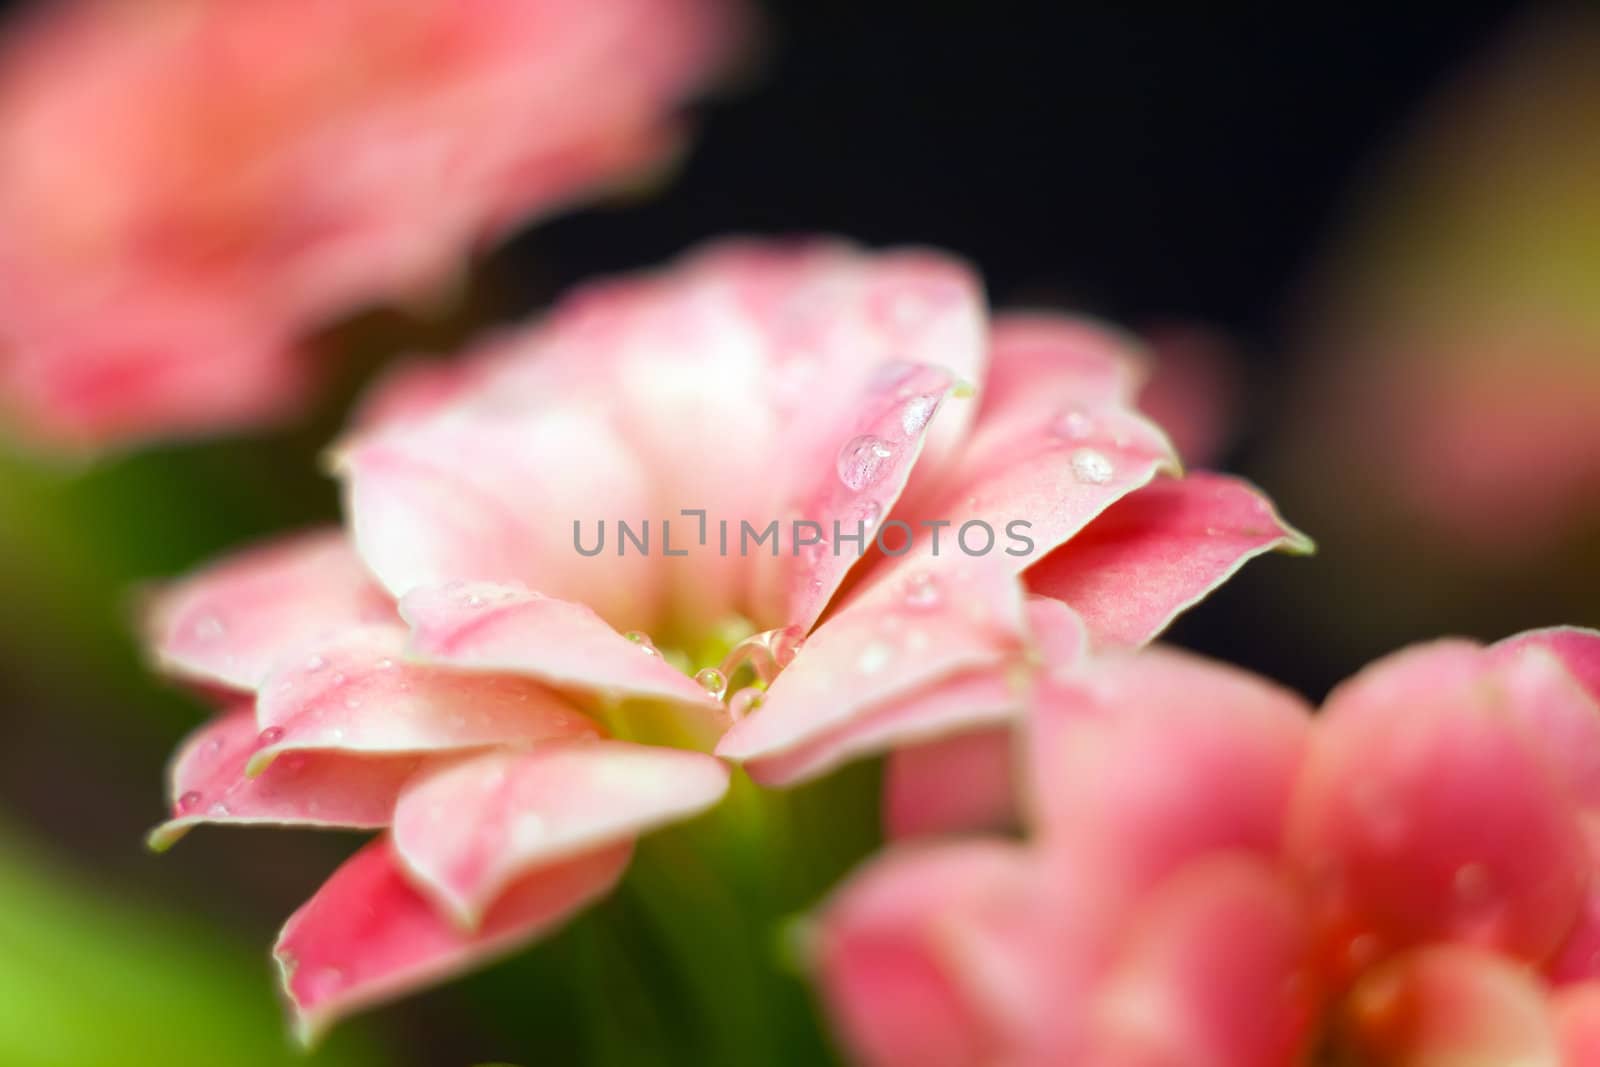 Water drops in the pink kalanchoe flowers